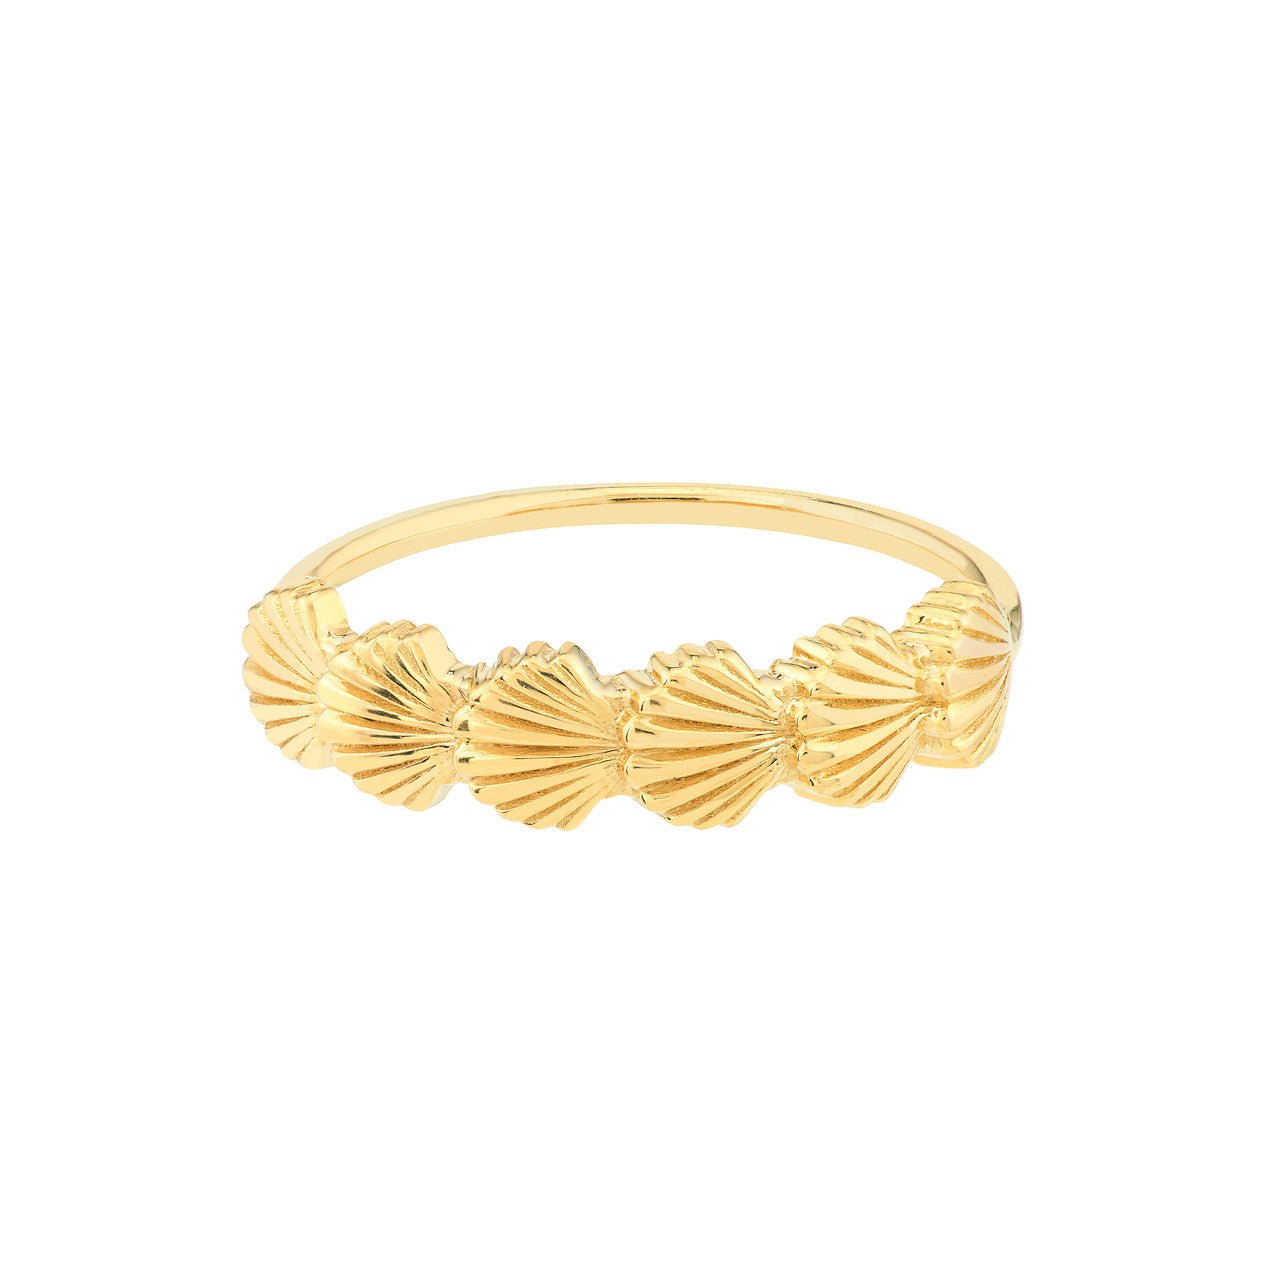 Gifts Under £200 - Jewelry Gifts